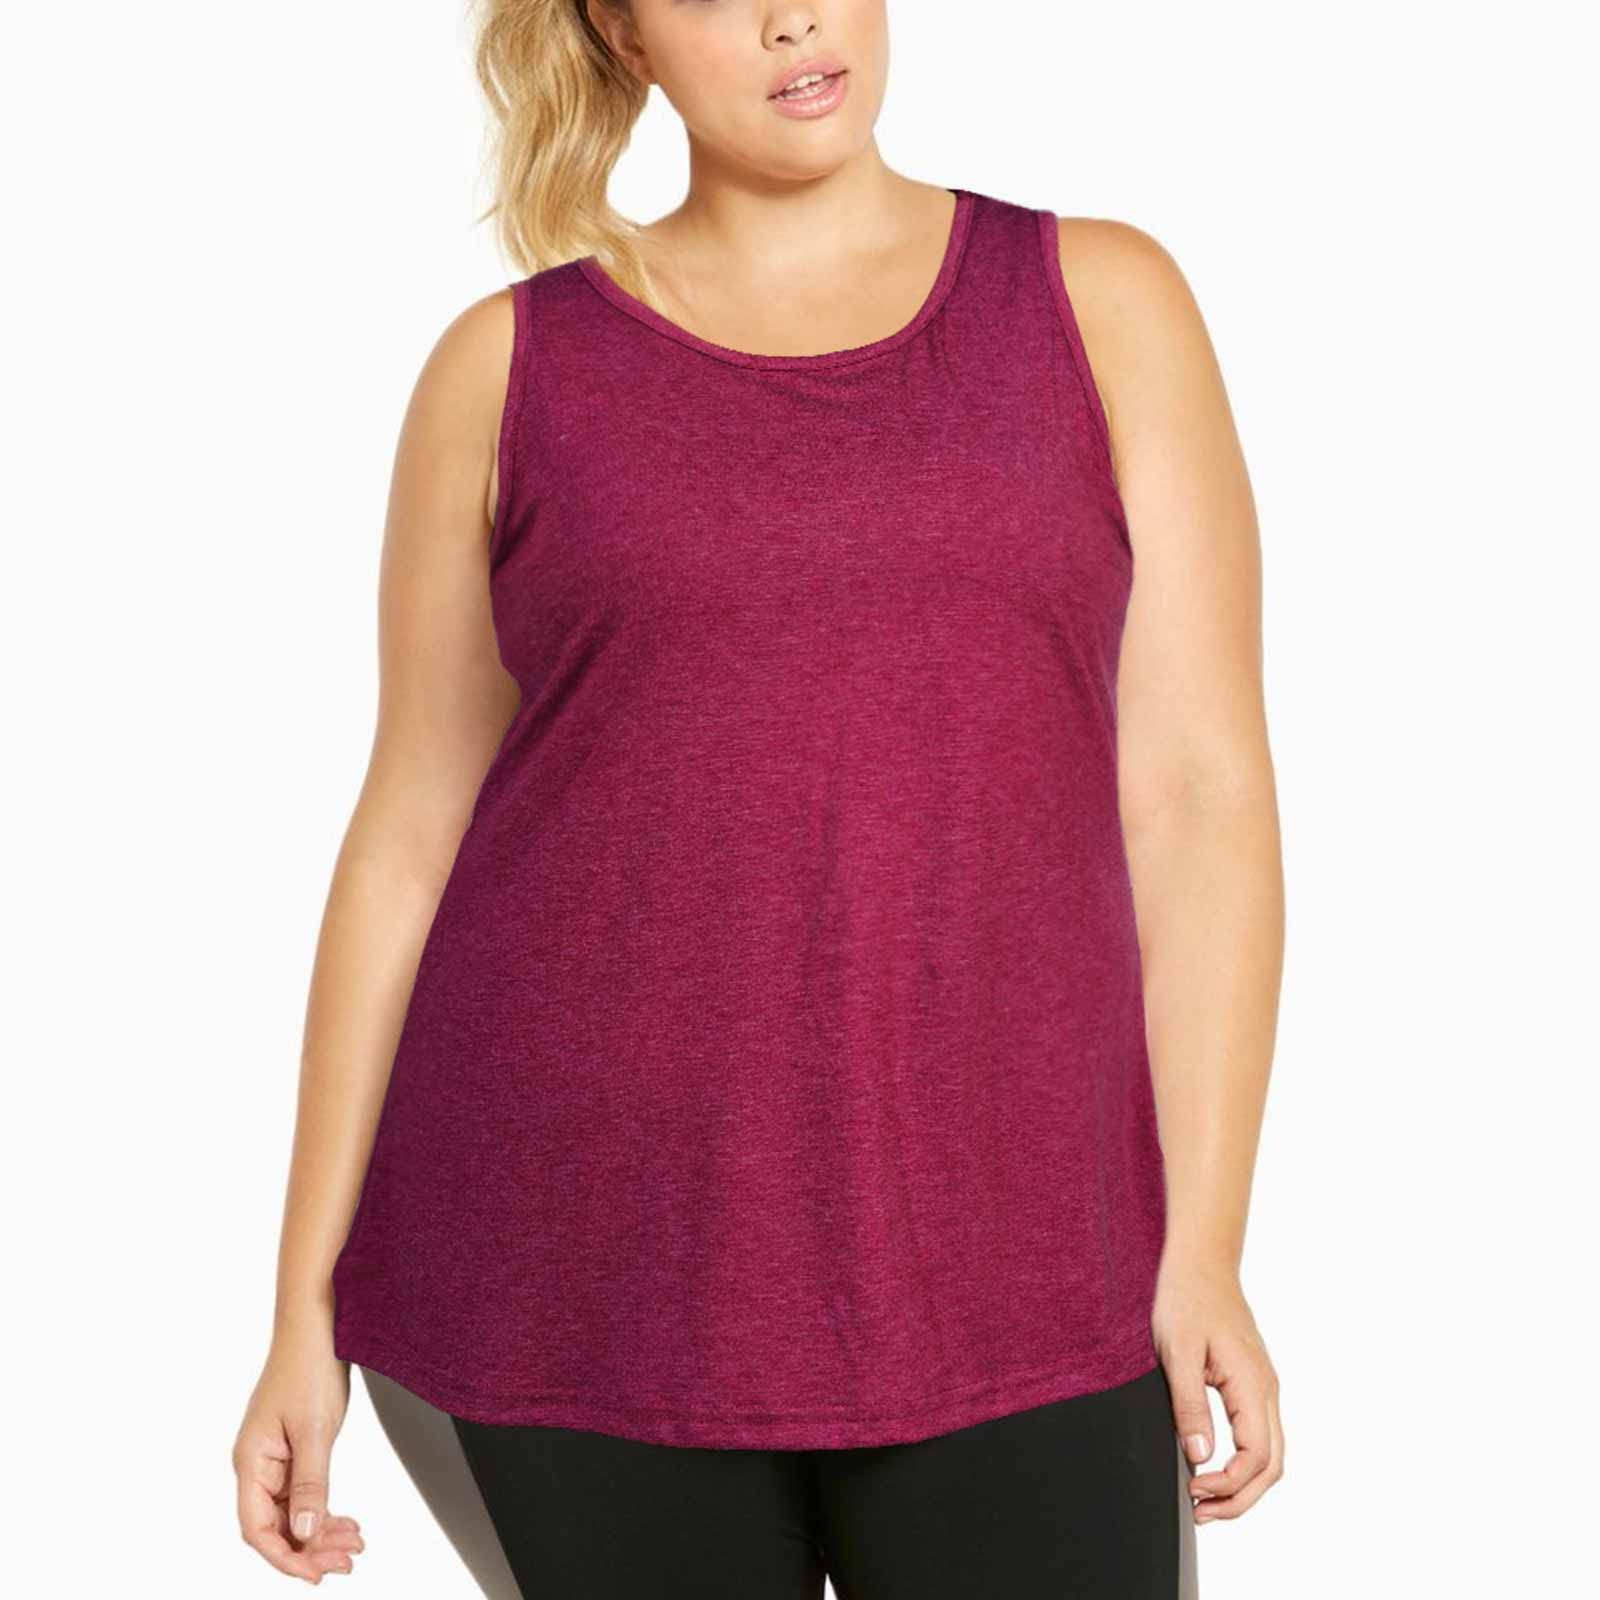 Plus Size Tank Tops for Women V Neck Knit - Green丨Moon Wood